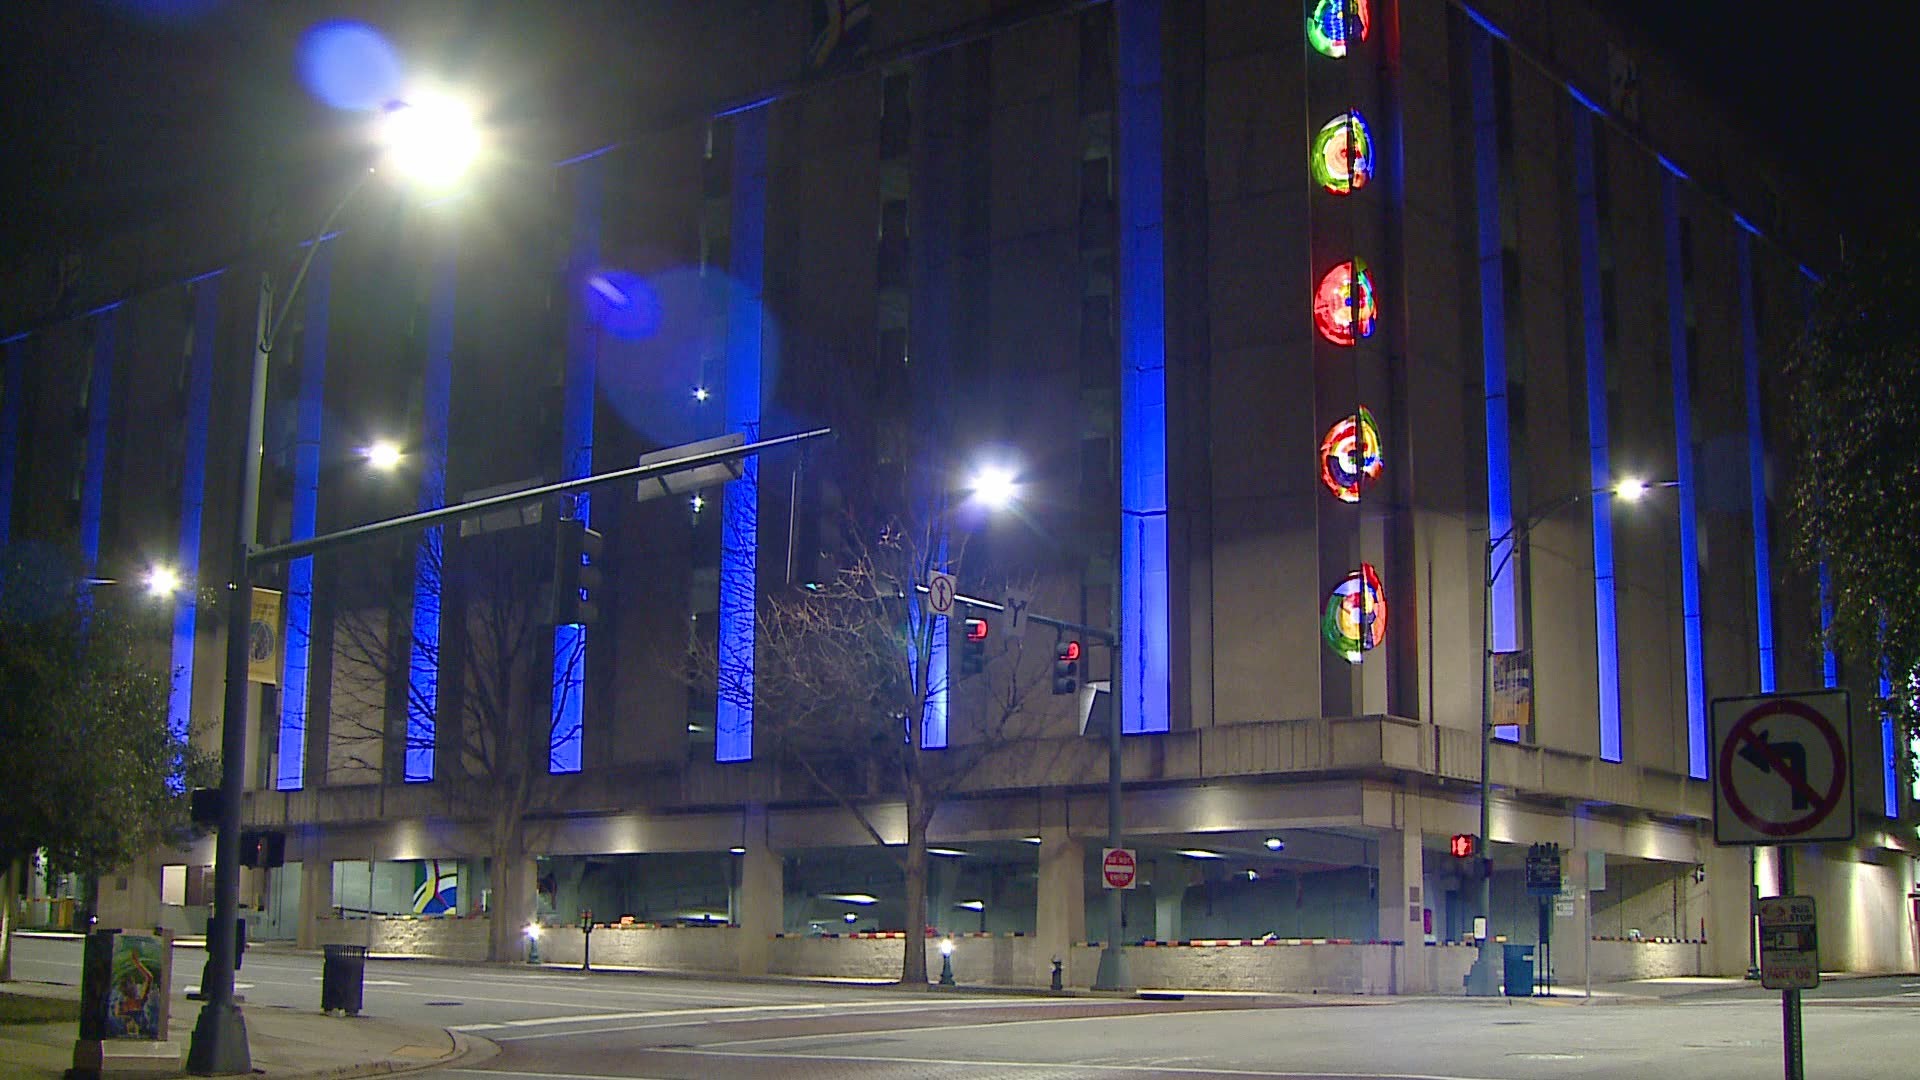 The Greene Street parking deck downtown was lit up blue as part of the national movement of unity and remembrance.